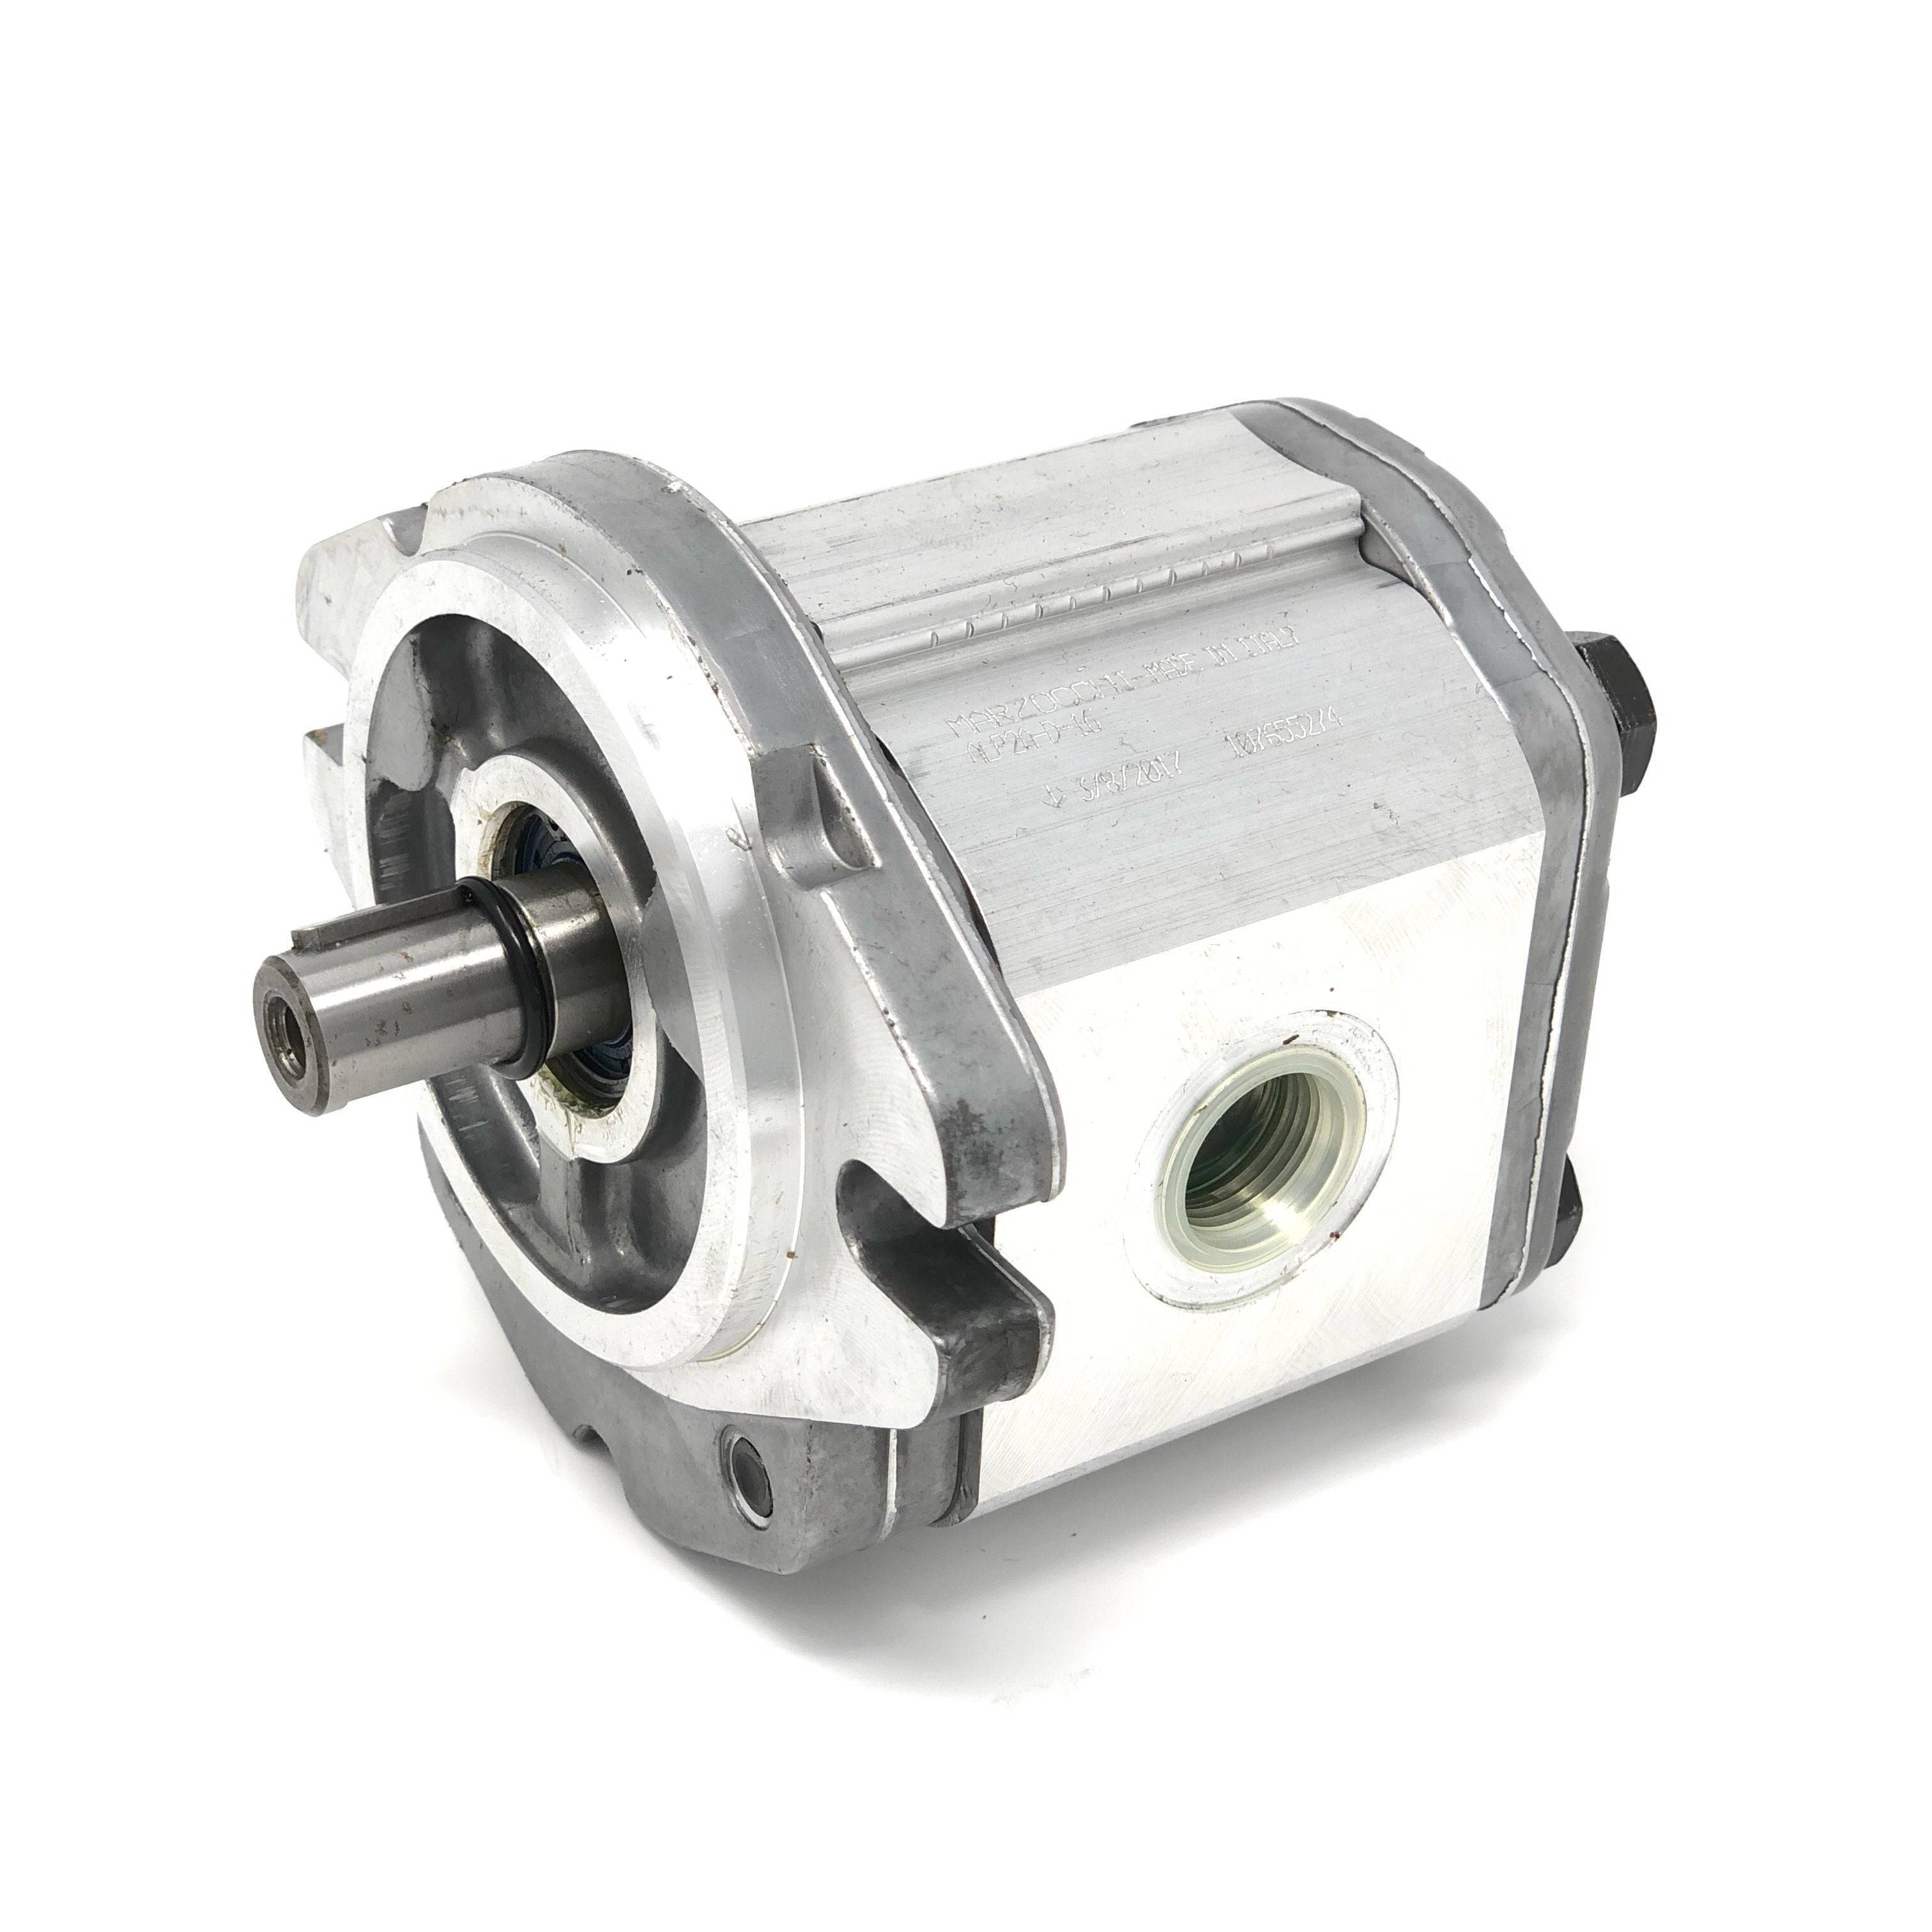 ALP2A-D-6 : Marzocchi Gear Pump, CW, 4.5cc (0.2745in3), 2.14 GPM, 3625psi, 4000 RPM, #12 SAE (3/4") In, #10 SAE (5/8") Out, Keyed Shaft 5/8" Bore x 5/32" Key, SAE A 2-Bolt Mount